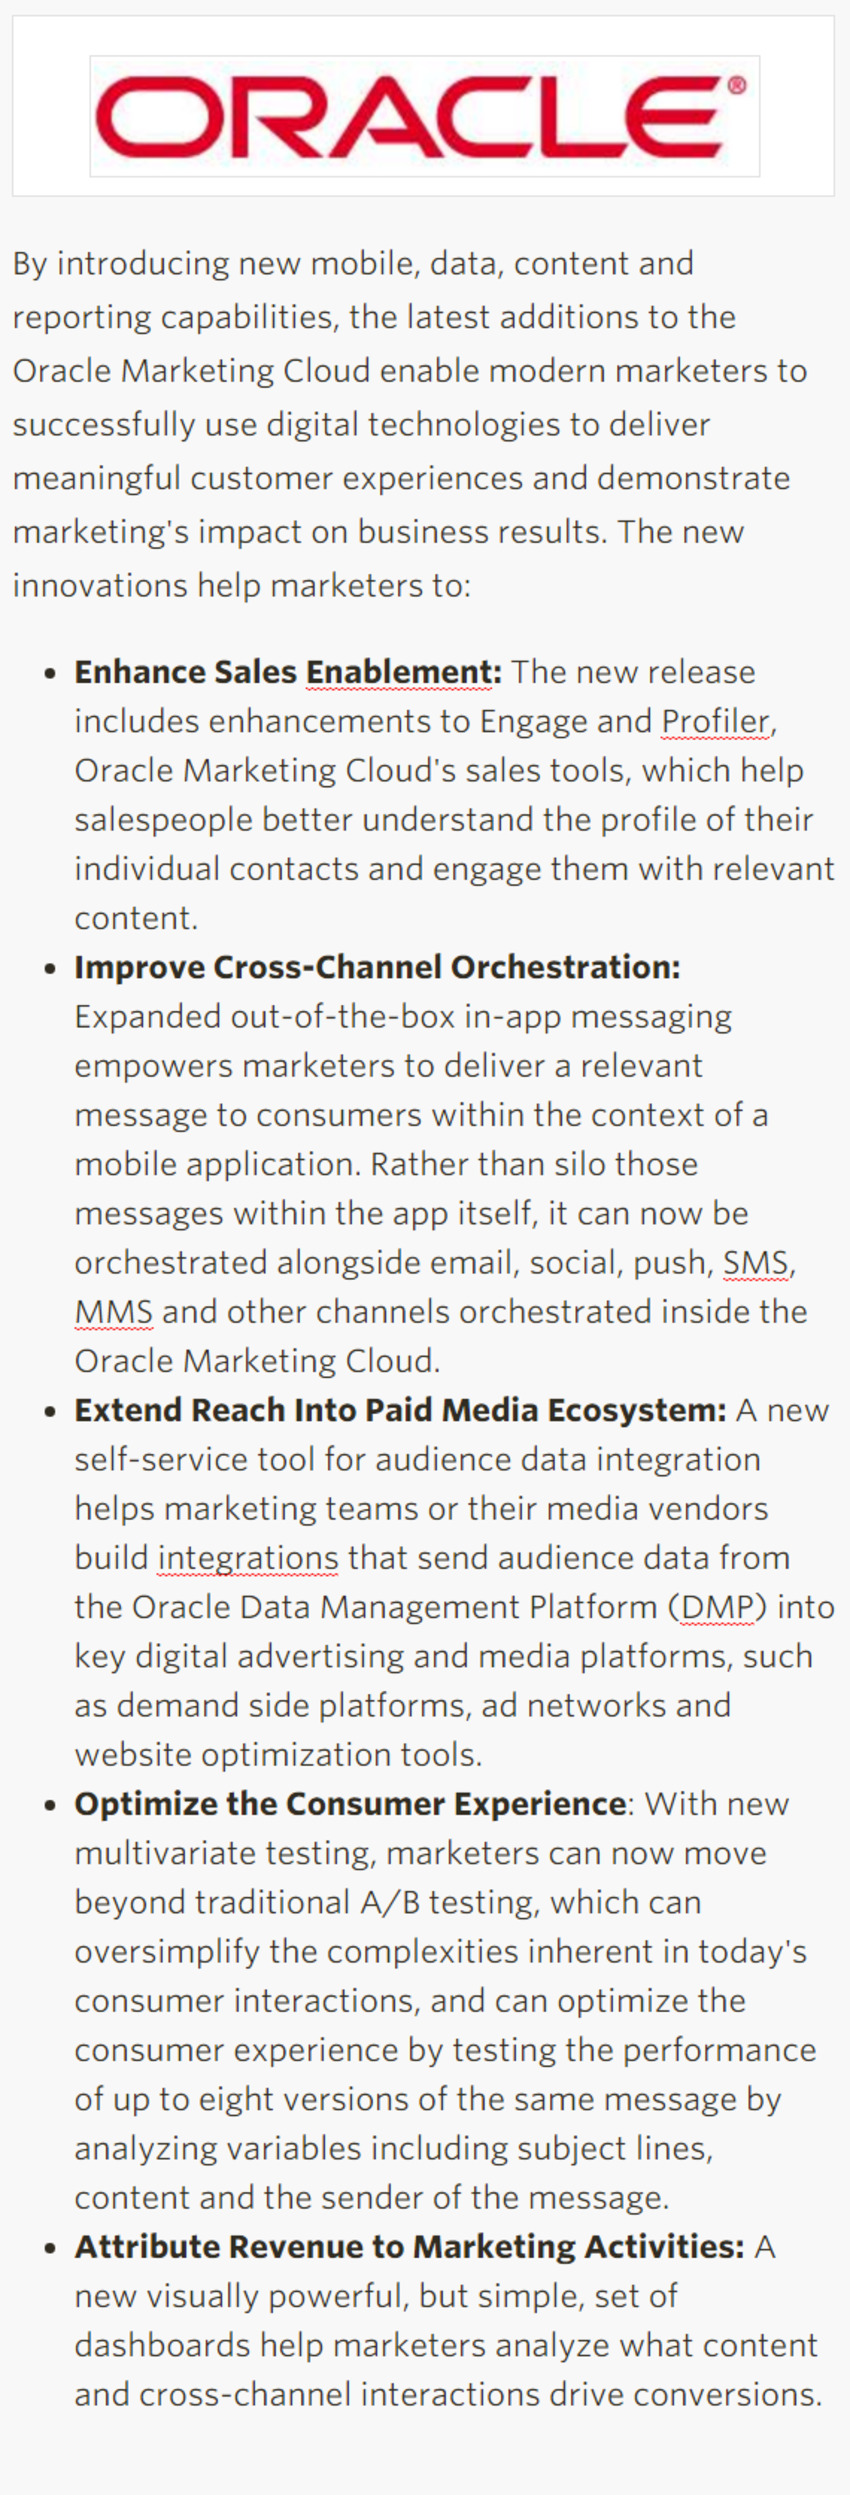 New Oracle Marketing Cloud Enhancements - Oracle | The MarTech Digest | Scoop.it